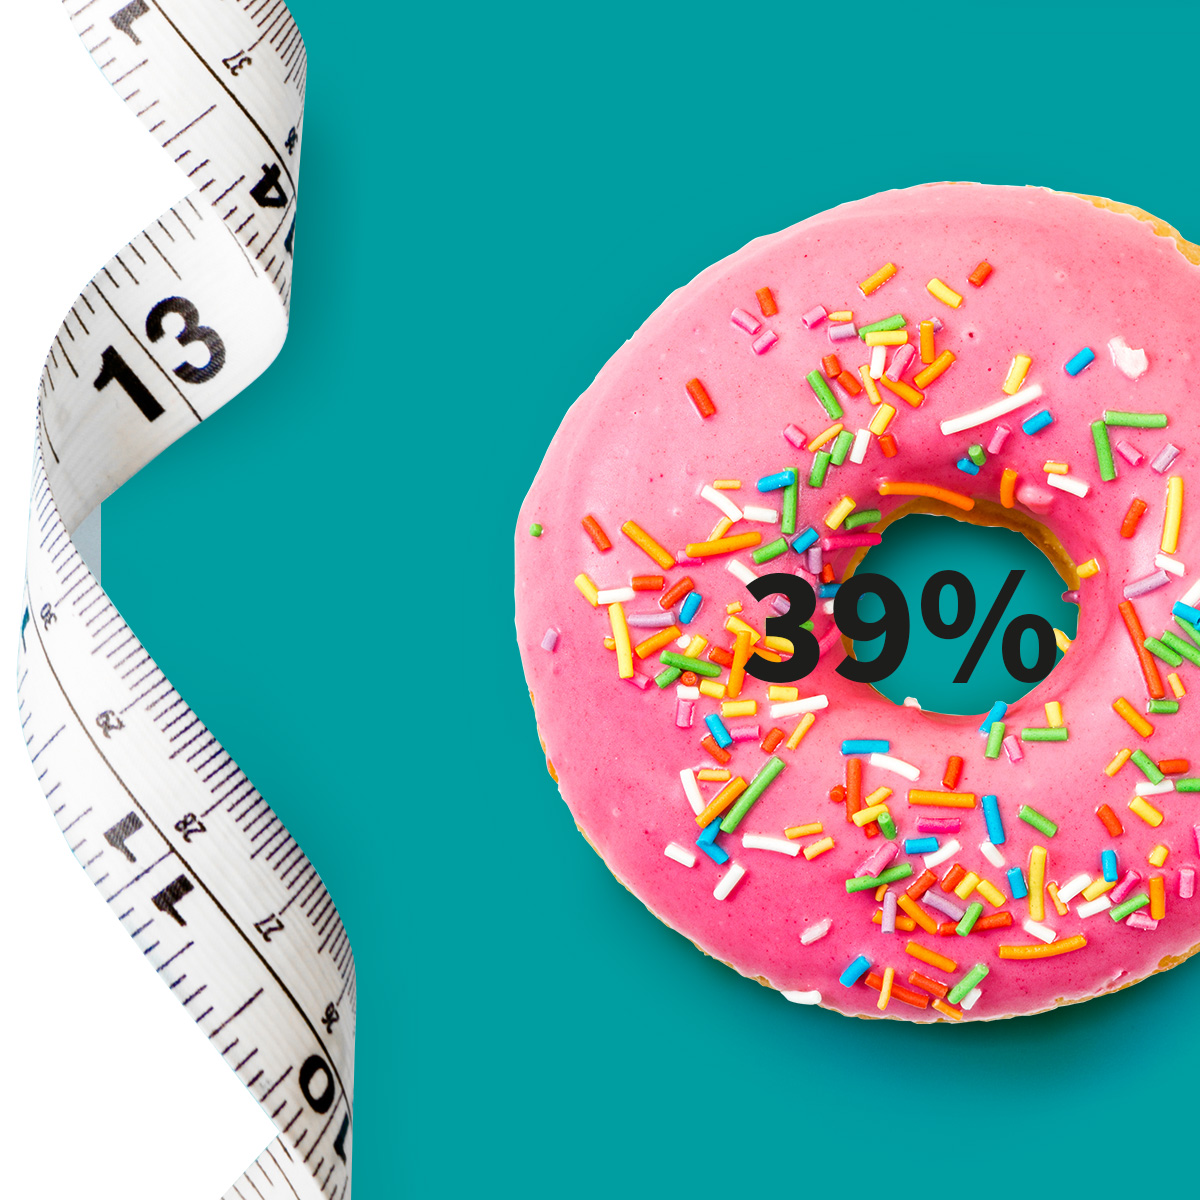 •	A measuring tape and a doughnut with pink icing and colourful sugar sprinkle as a metaphor for obesity